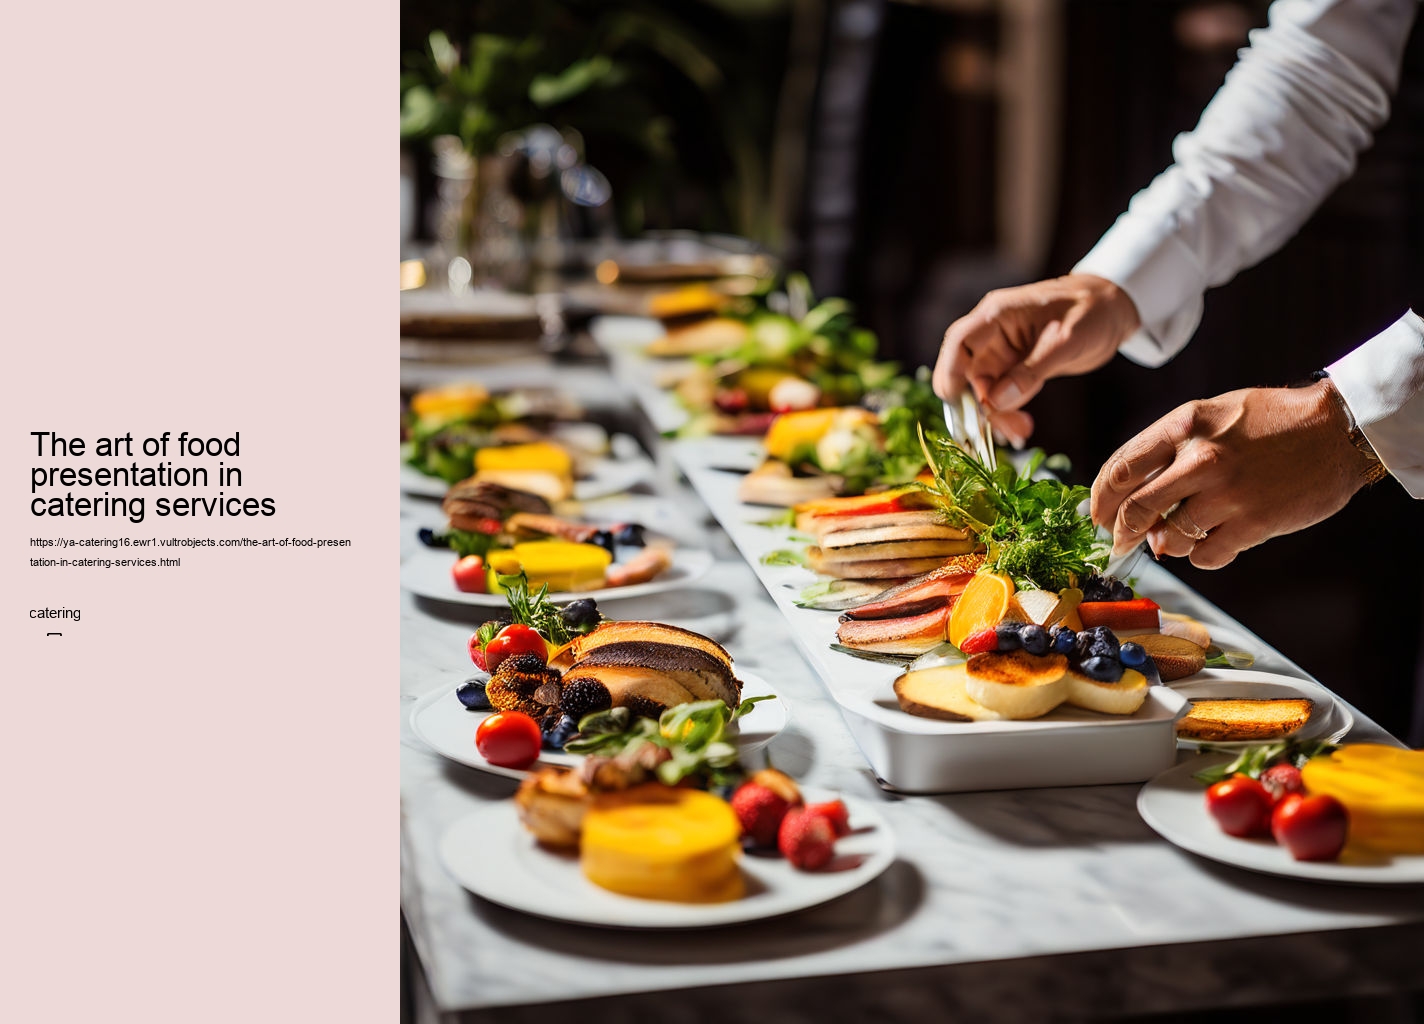 The art of food presentation in catering services